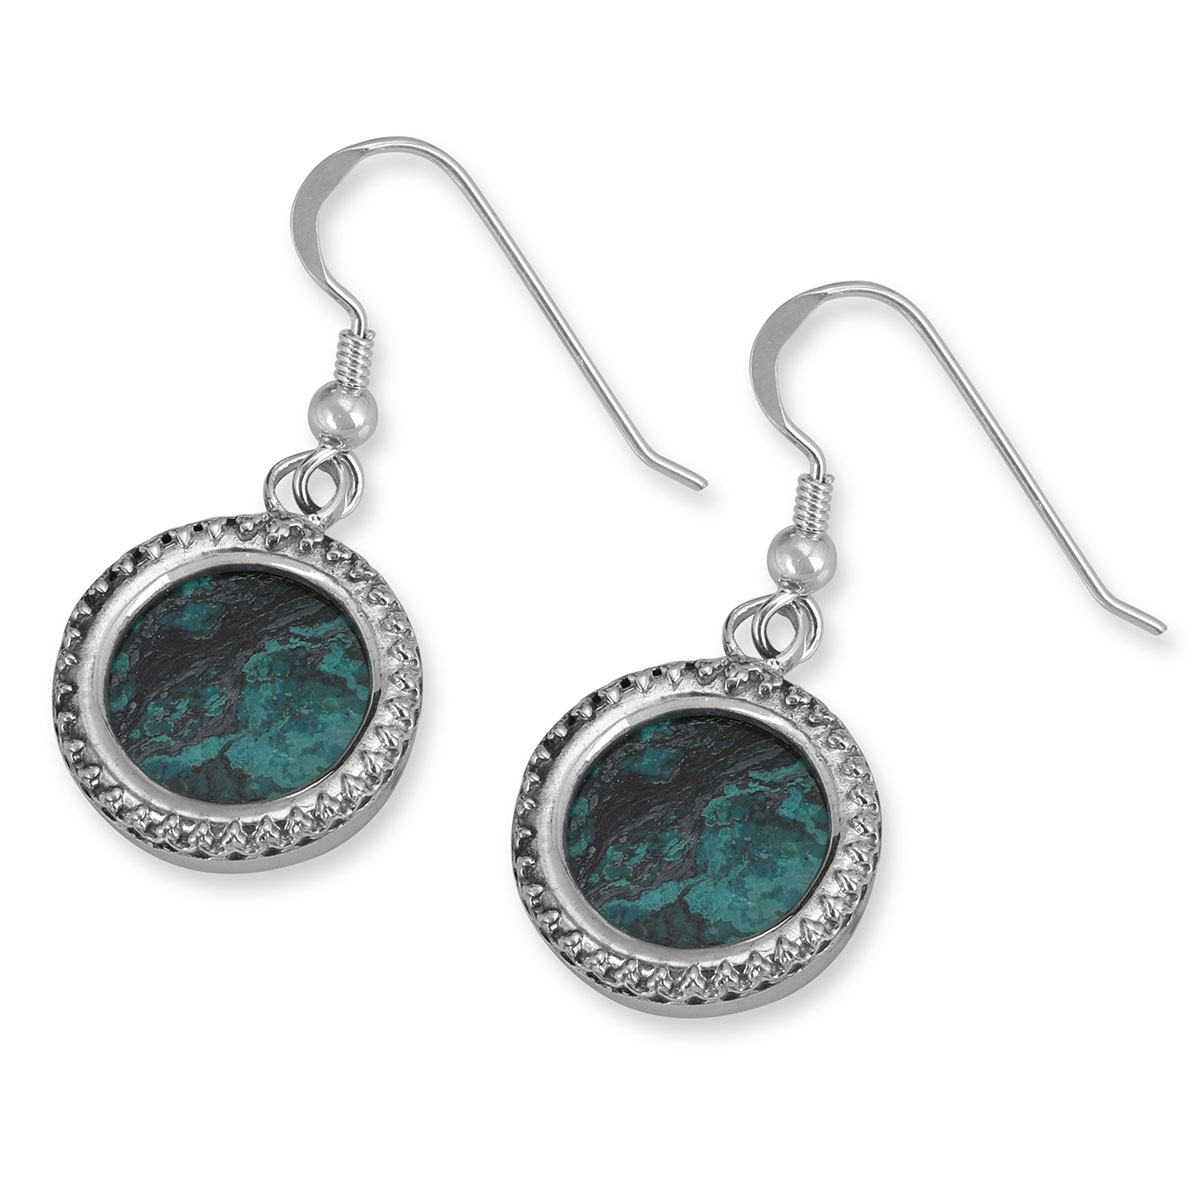 925 Sterling Silver Rounded Earrings With Eilat Stone - 1